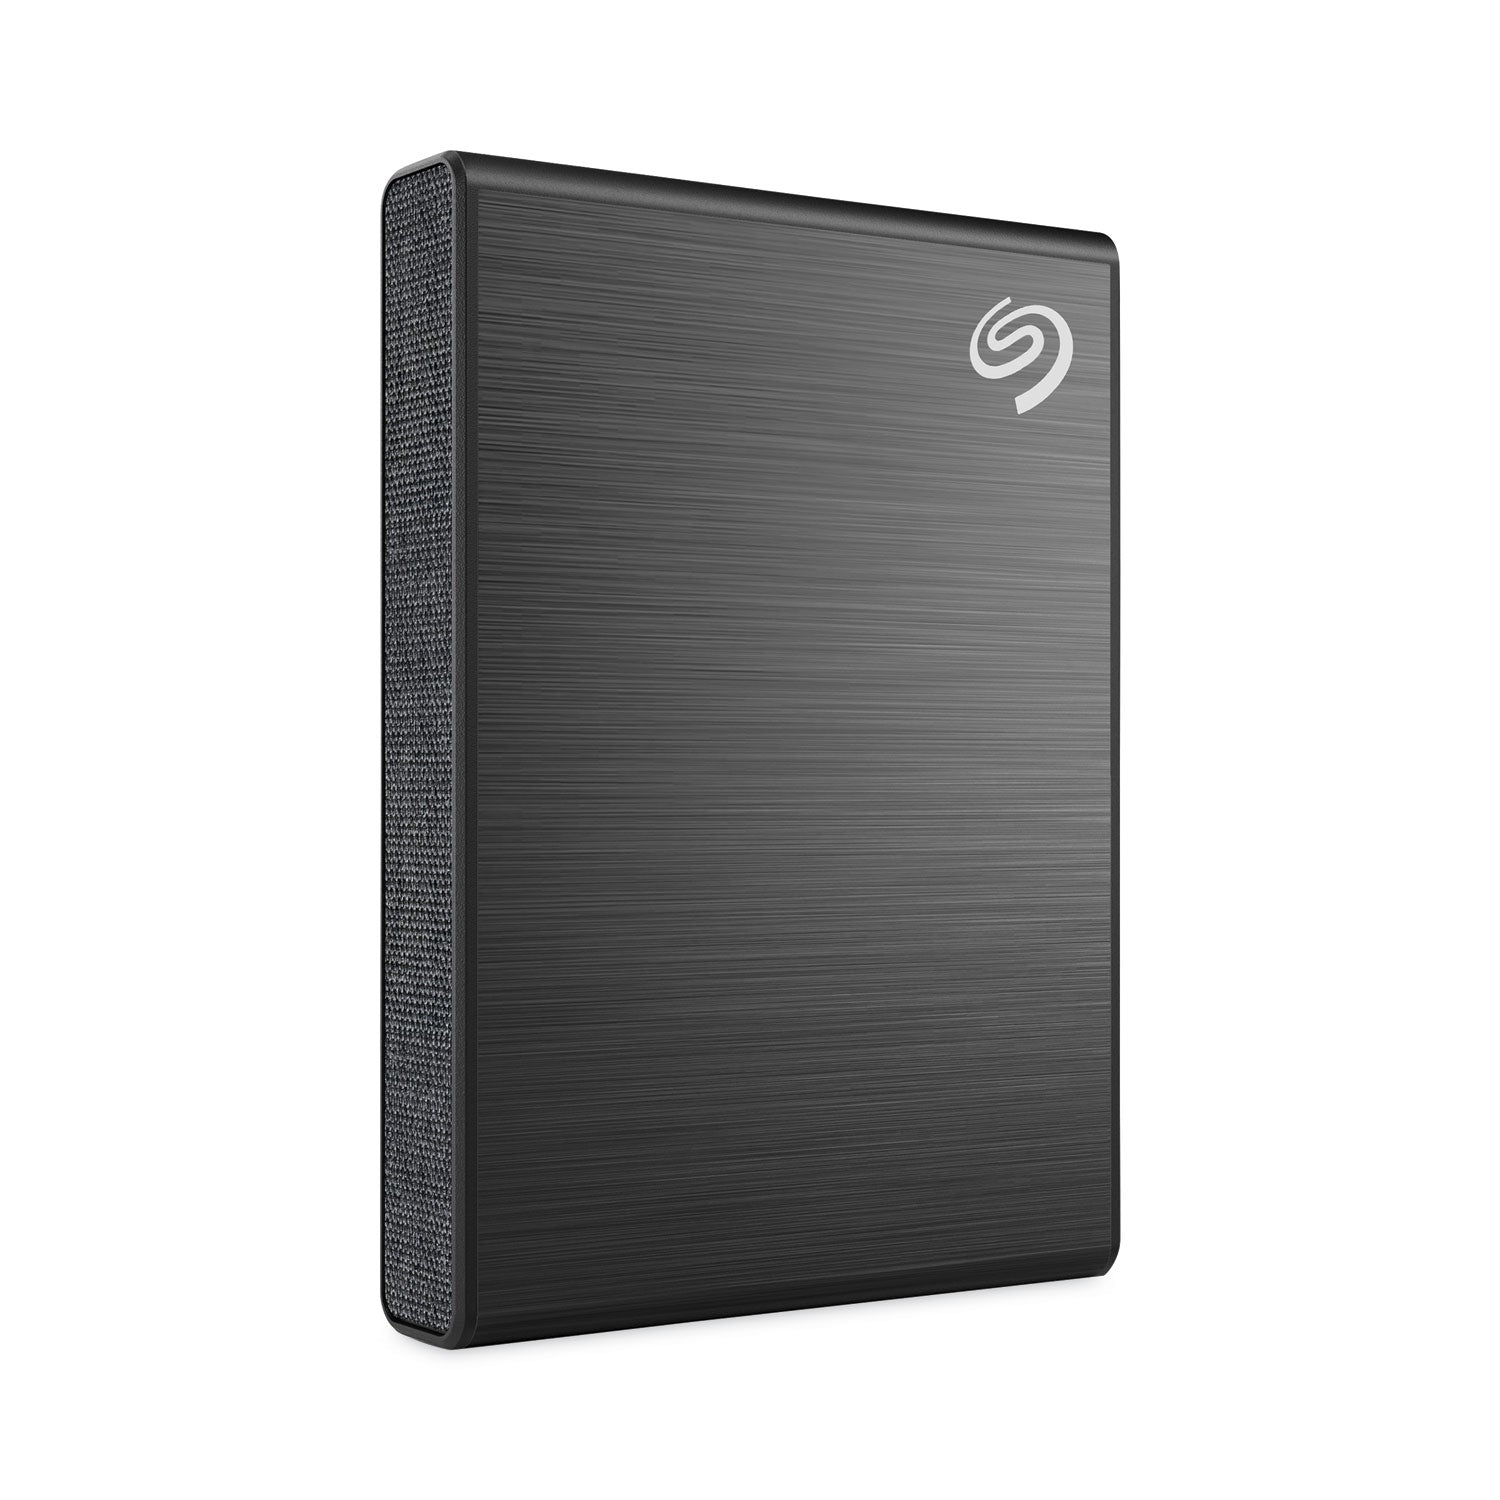 one-touch-external-solid-state-drive-1-tb-usb-30-black_sgtstkg1000400 - 2